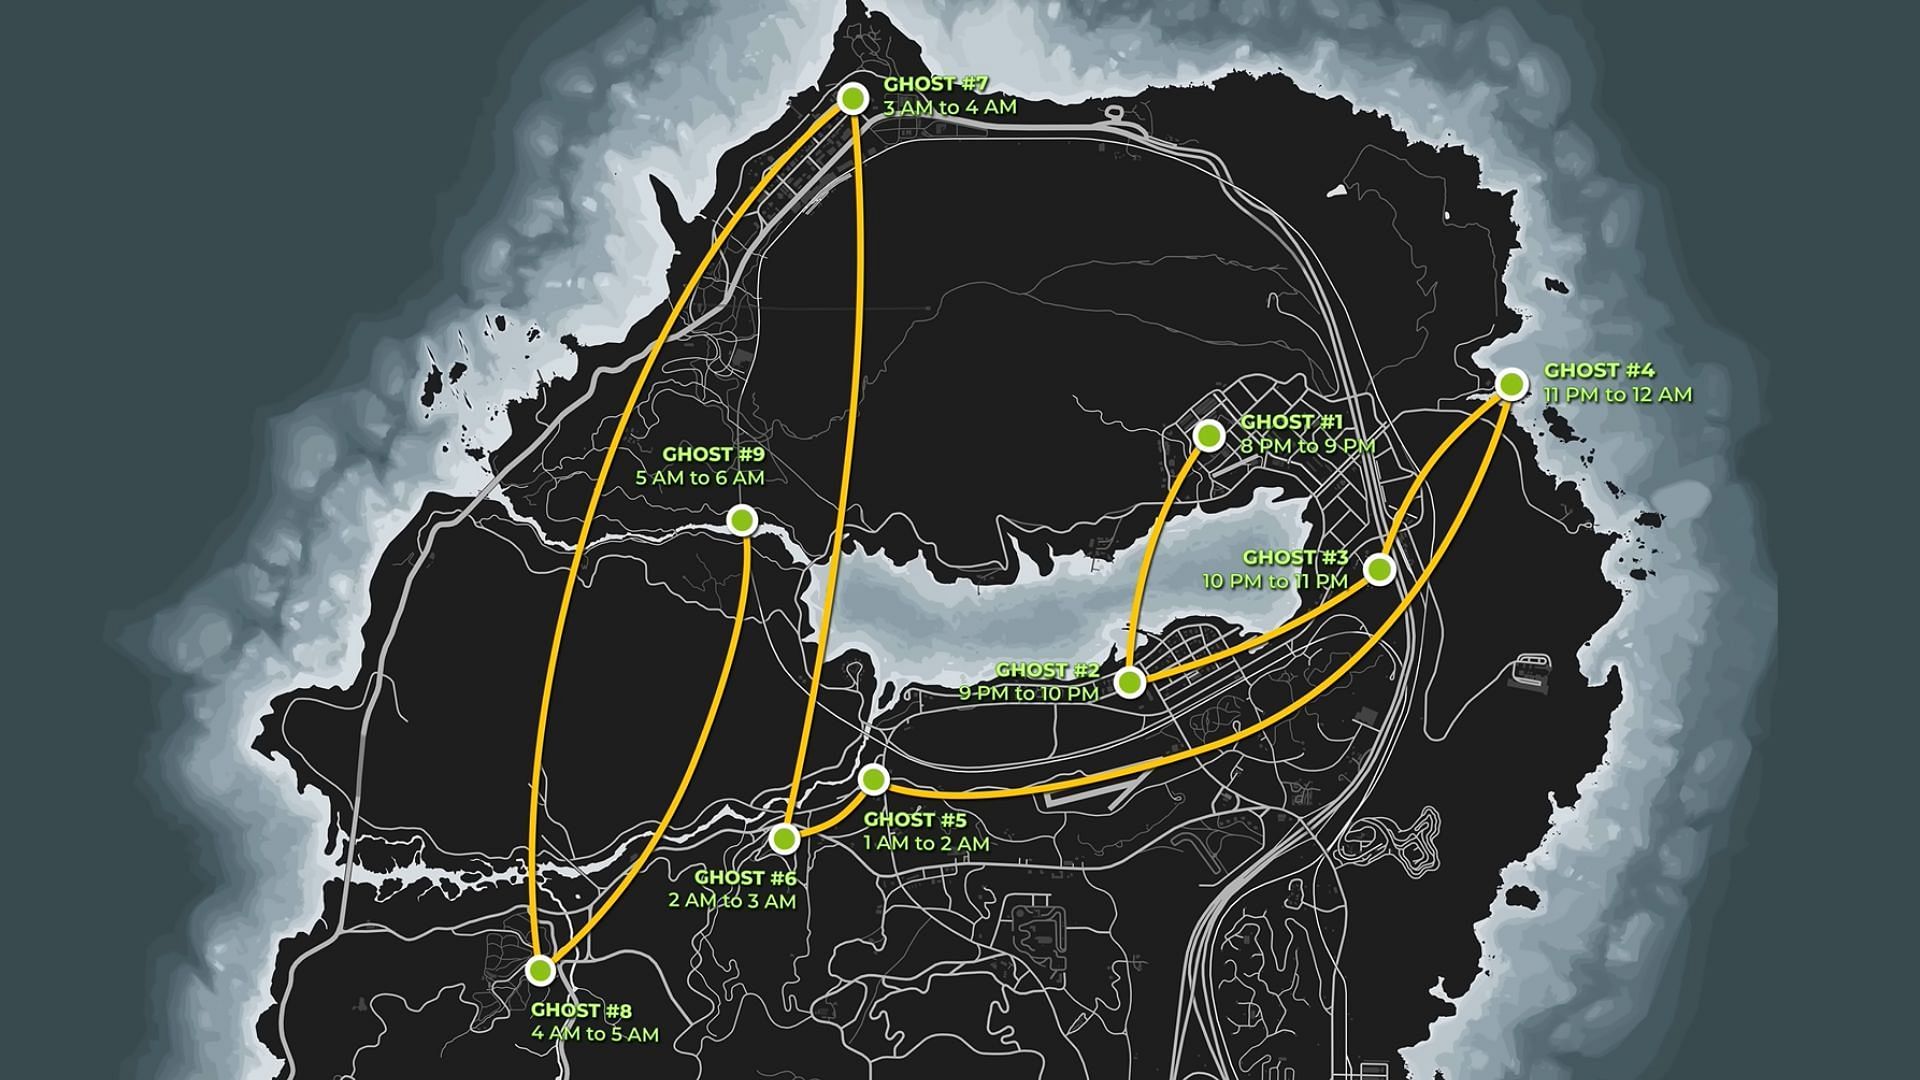 Suggested route for completing the Ghosts Exposed event (Image via YouTube/GTA Series Videos)